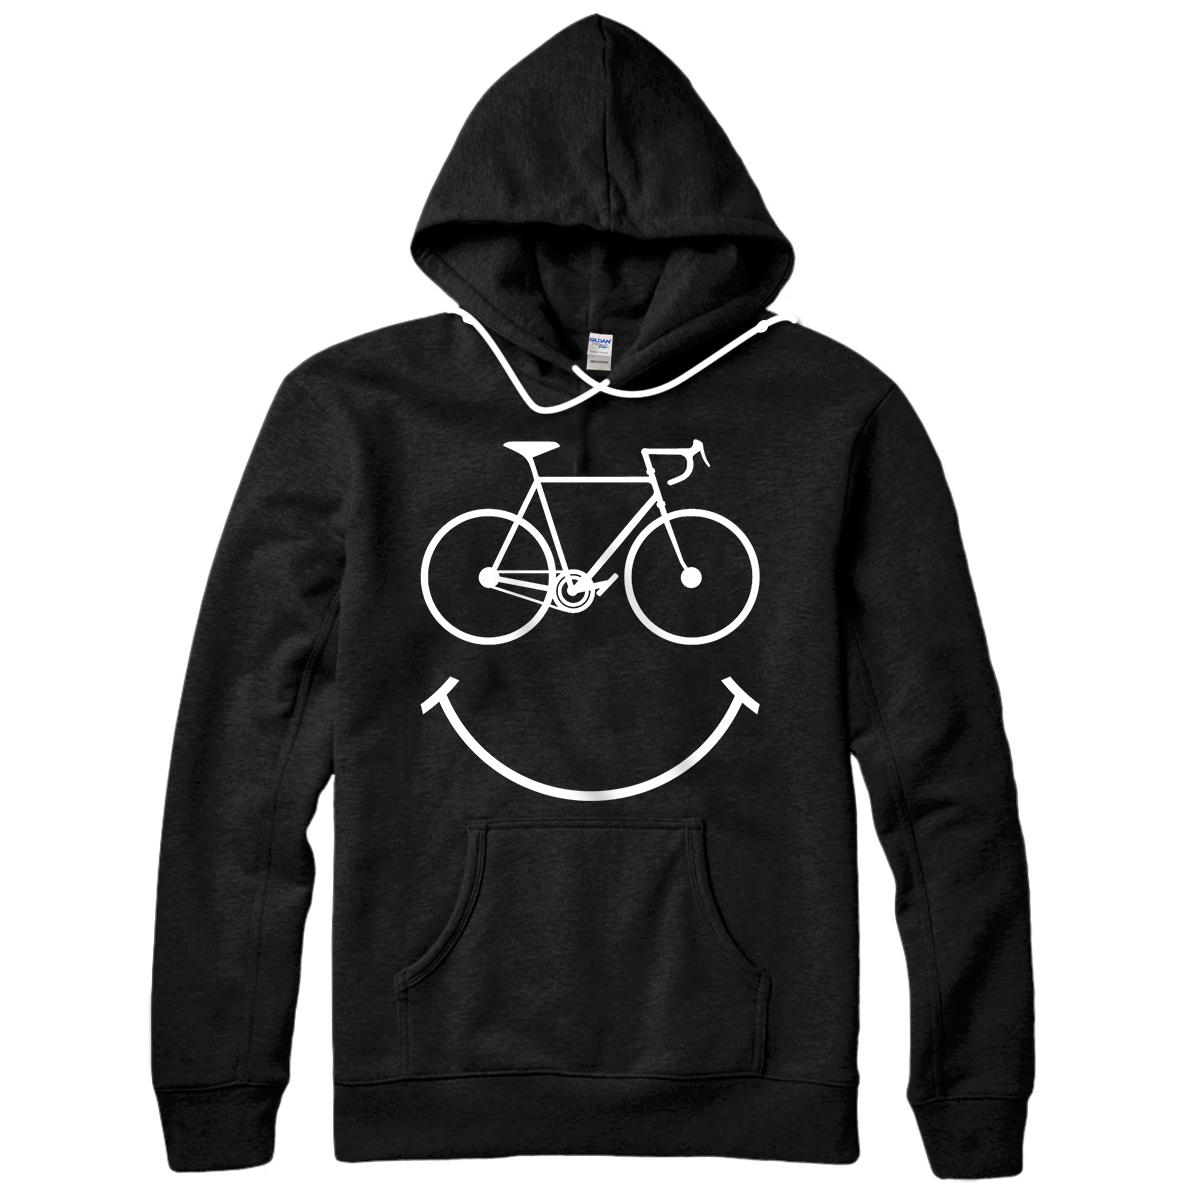 Personalized Funny Cycling Biking Bicycle Cyclist Bike Themed Smile Gift Pullover Hoodie